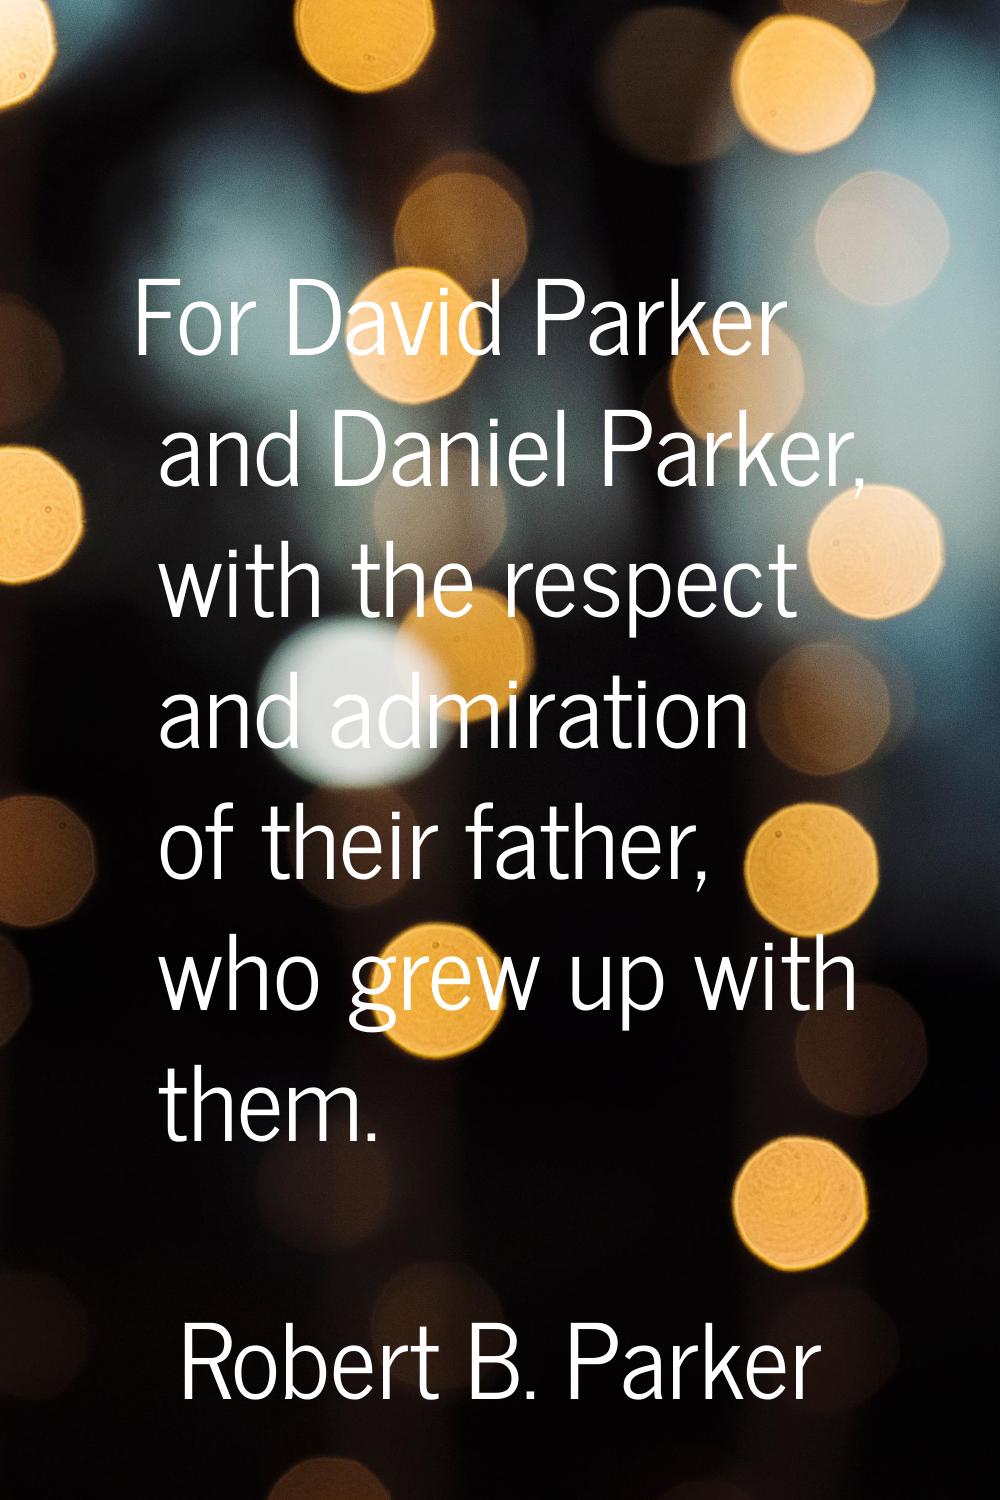 For David Parker and Daniel Parker, with the respect and admiration of their father, who grew up wi